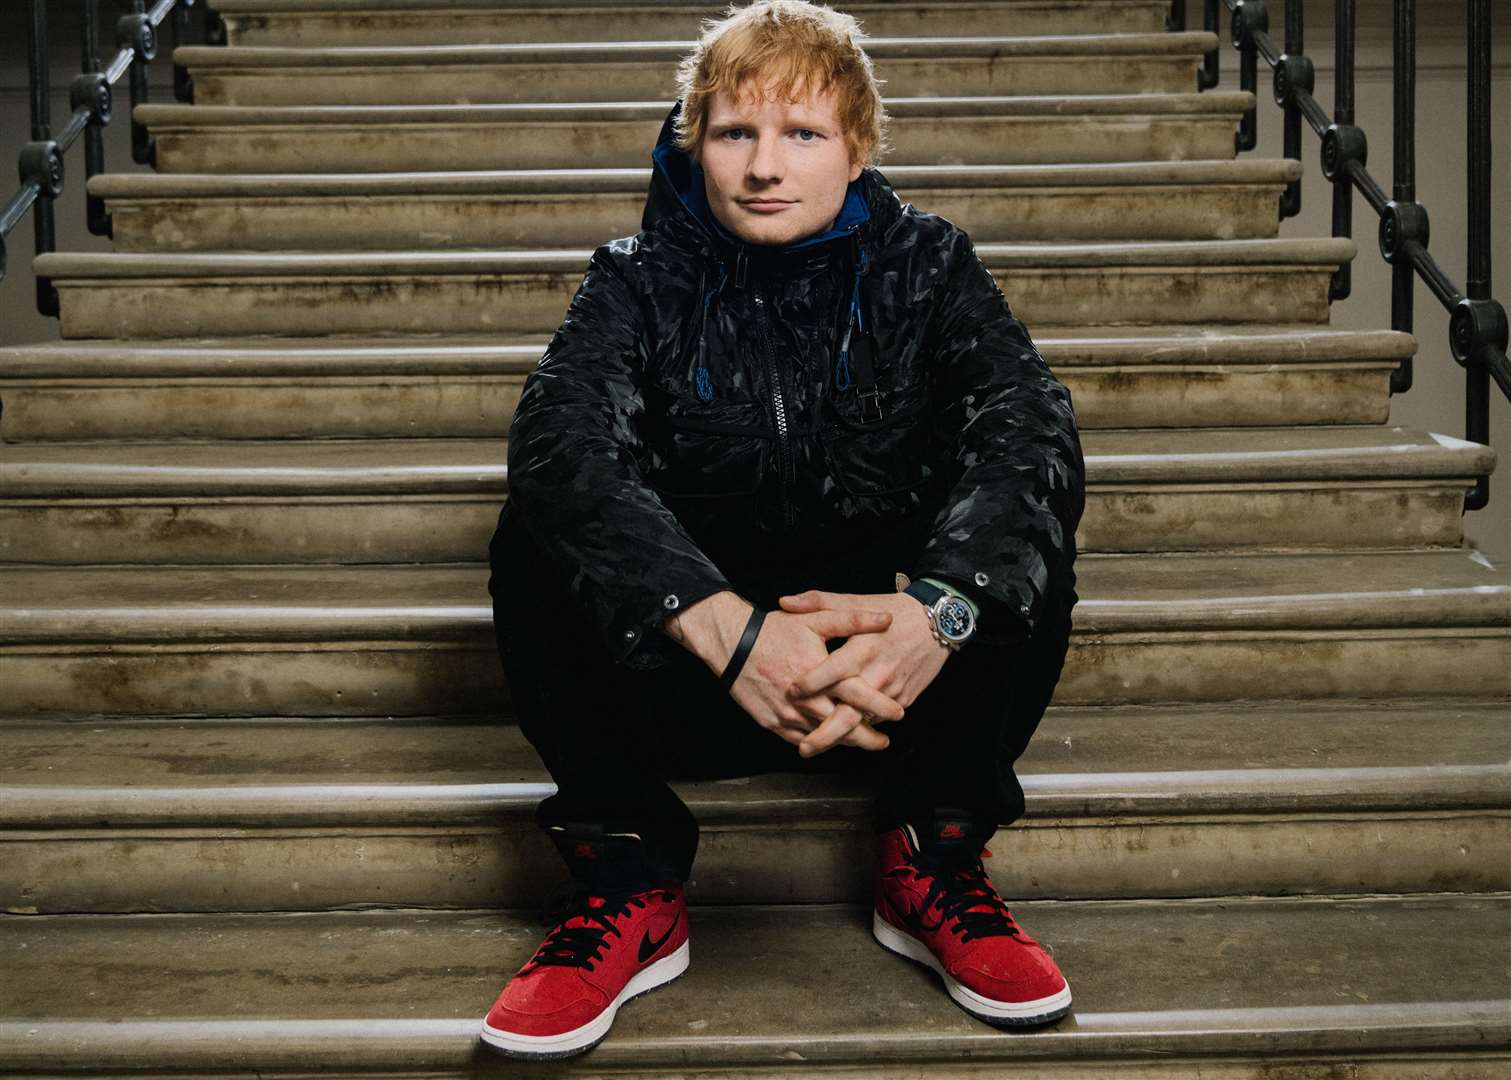 Will the ubiquitous Ed Sheeran be sat on top of your listening list?